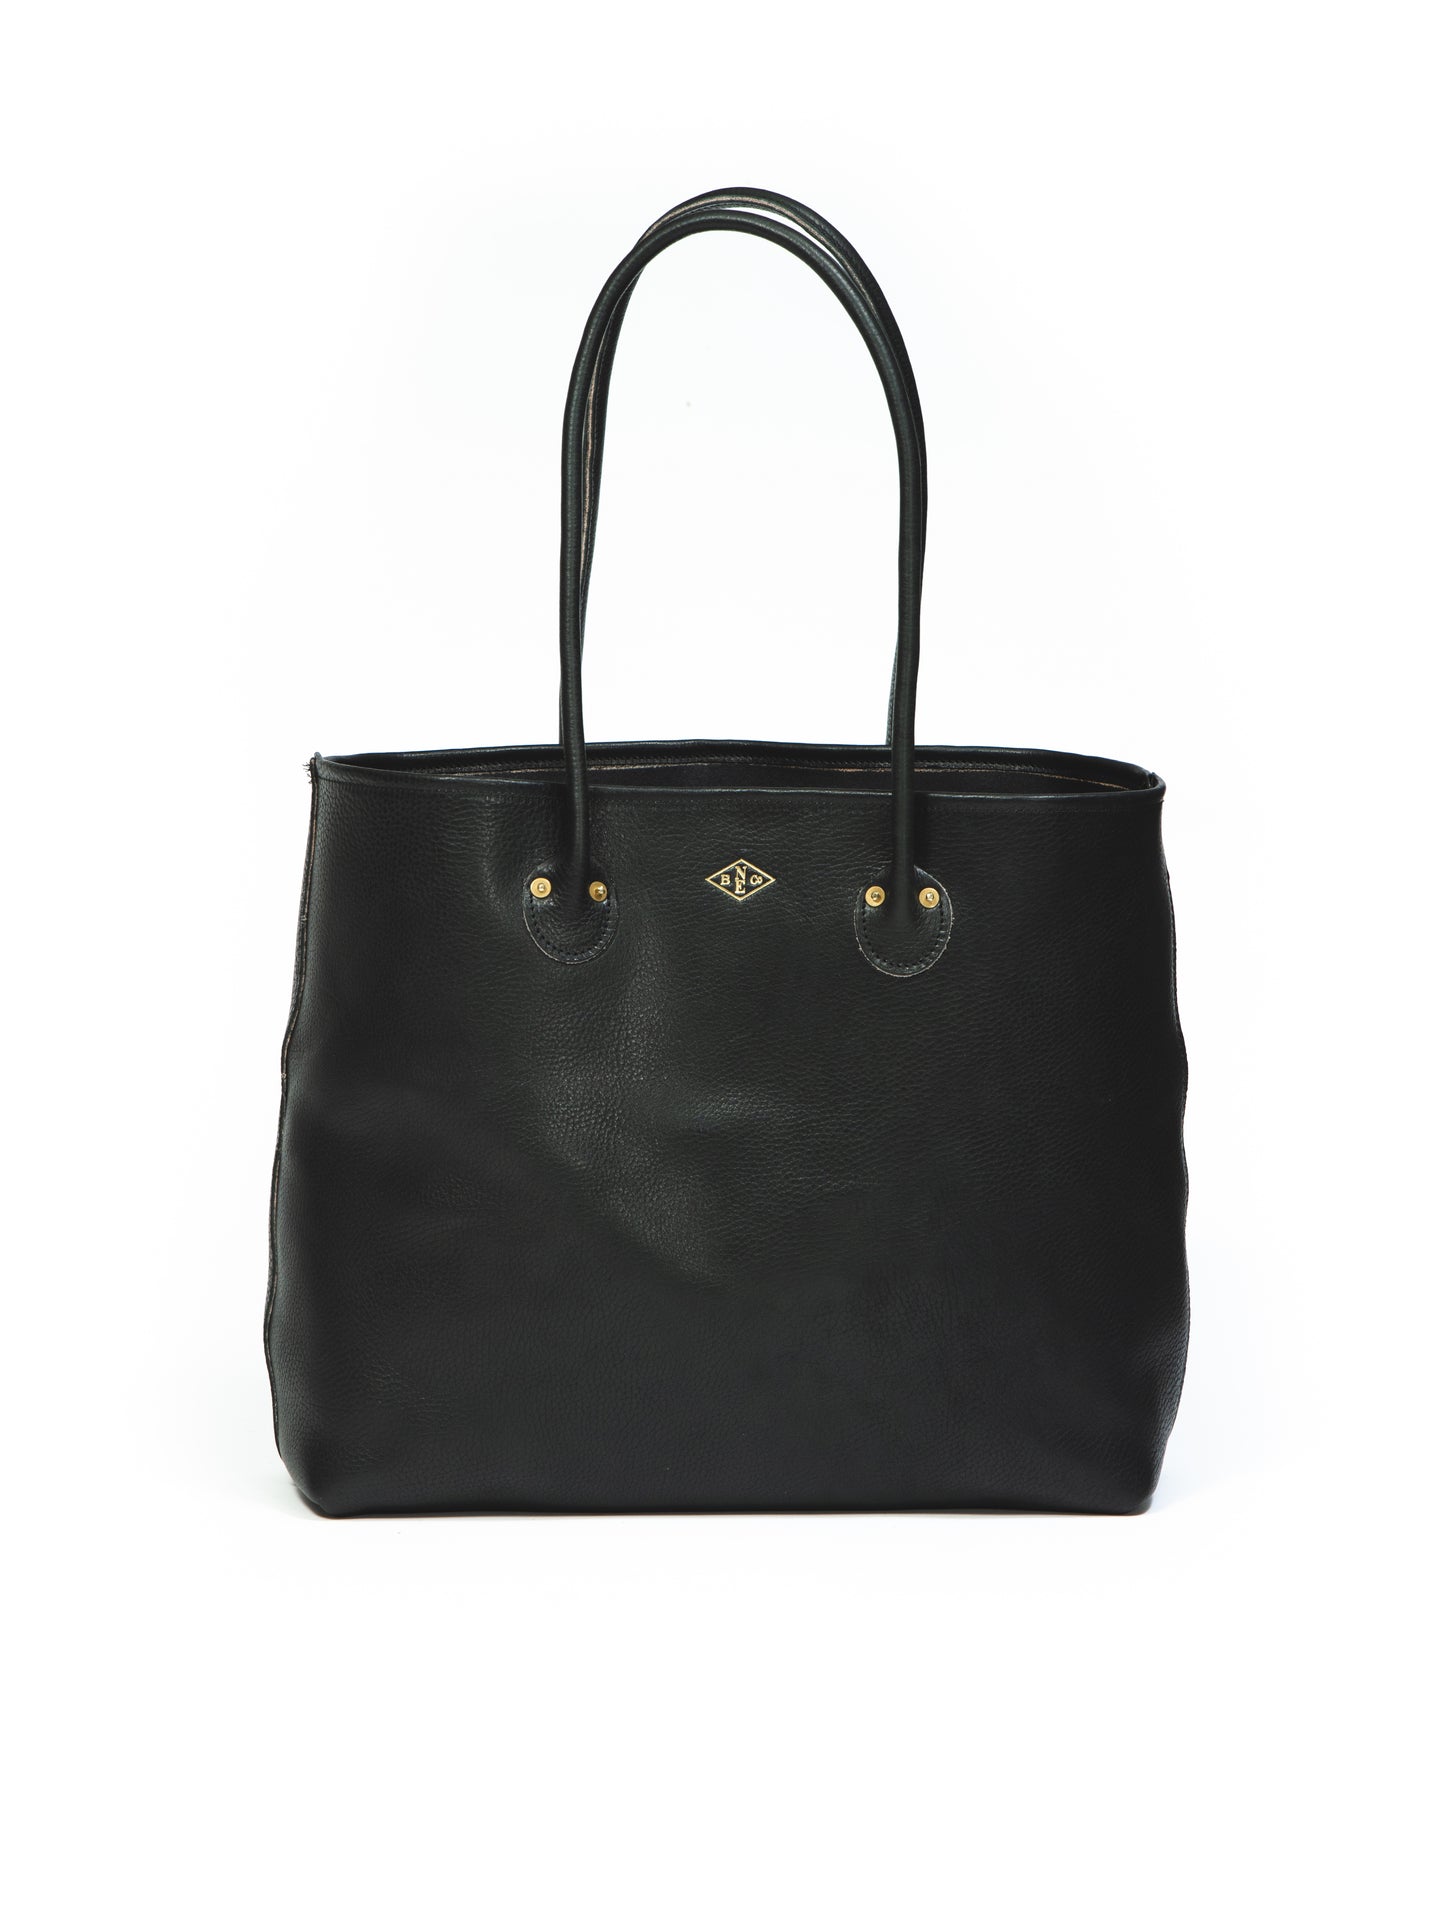 The All-Leather Tote